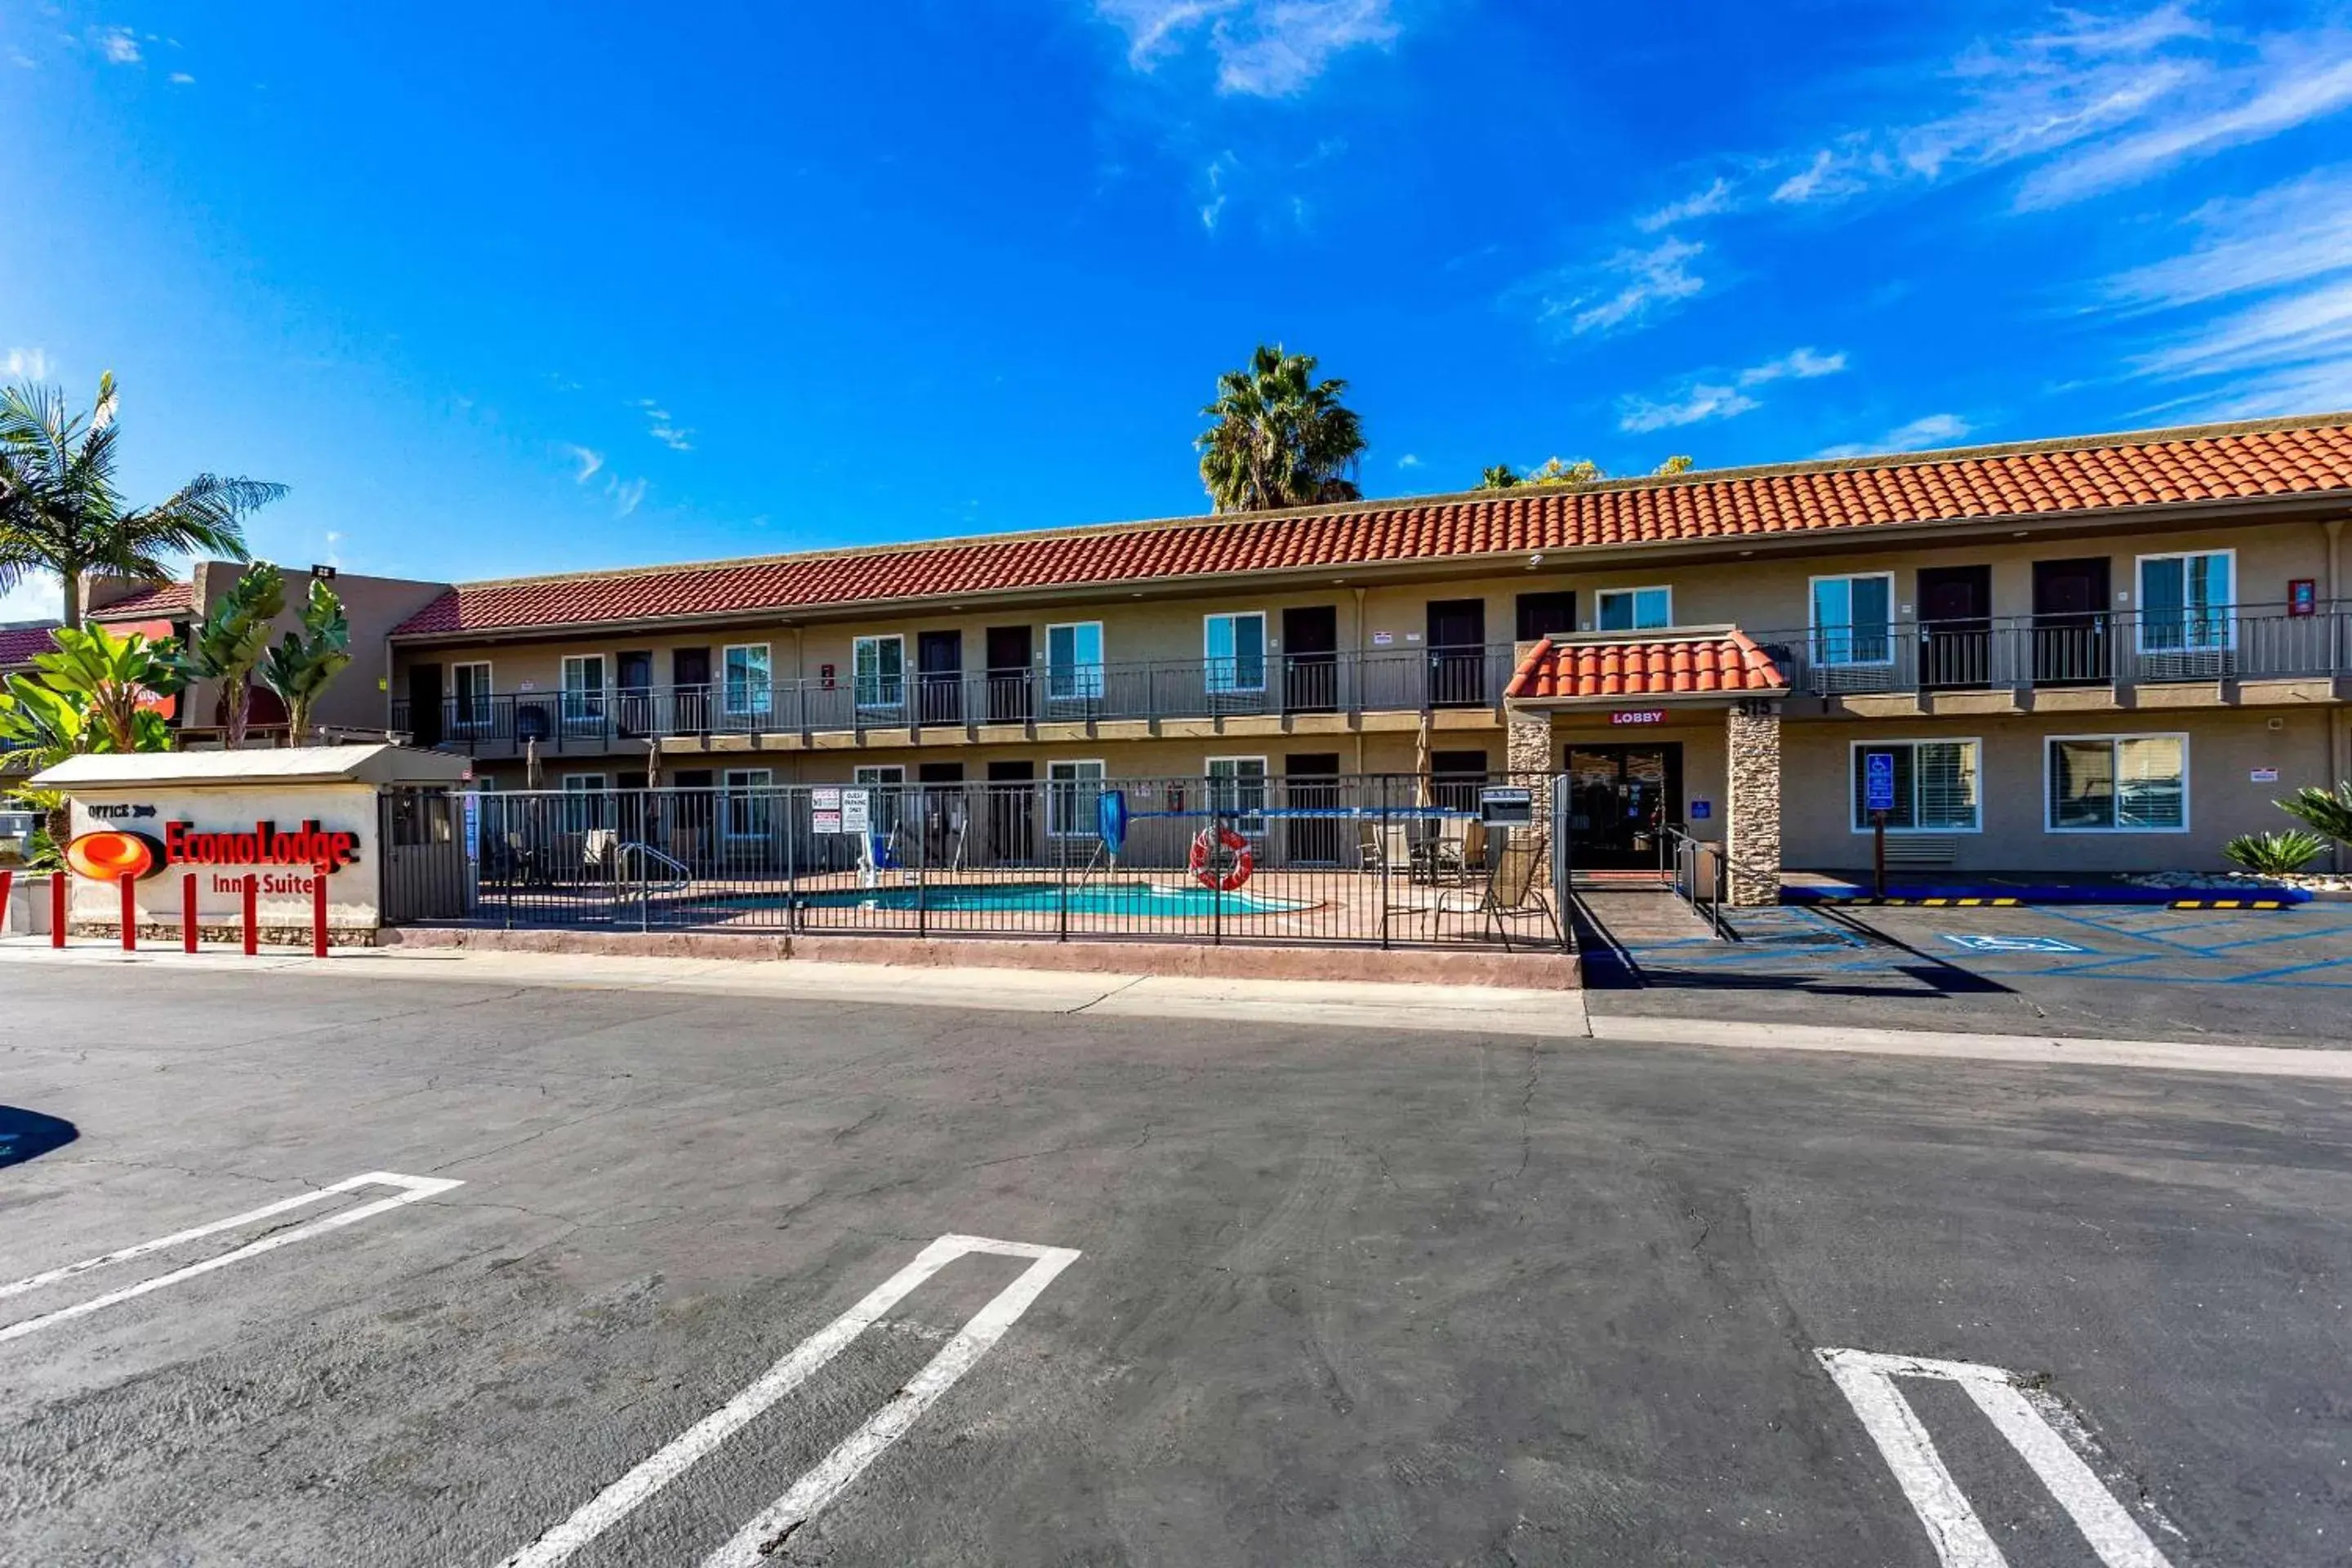 Property Building in Econo Lodge Inn & Suites Escondido Downtown